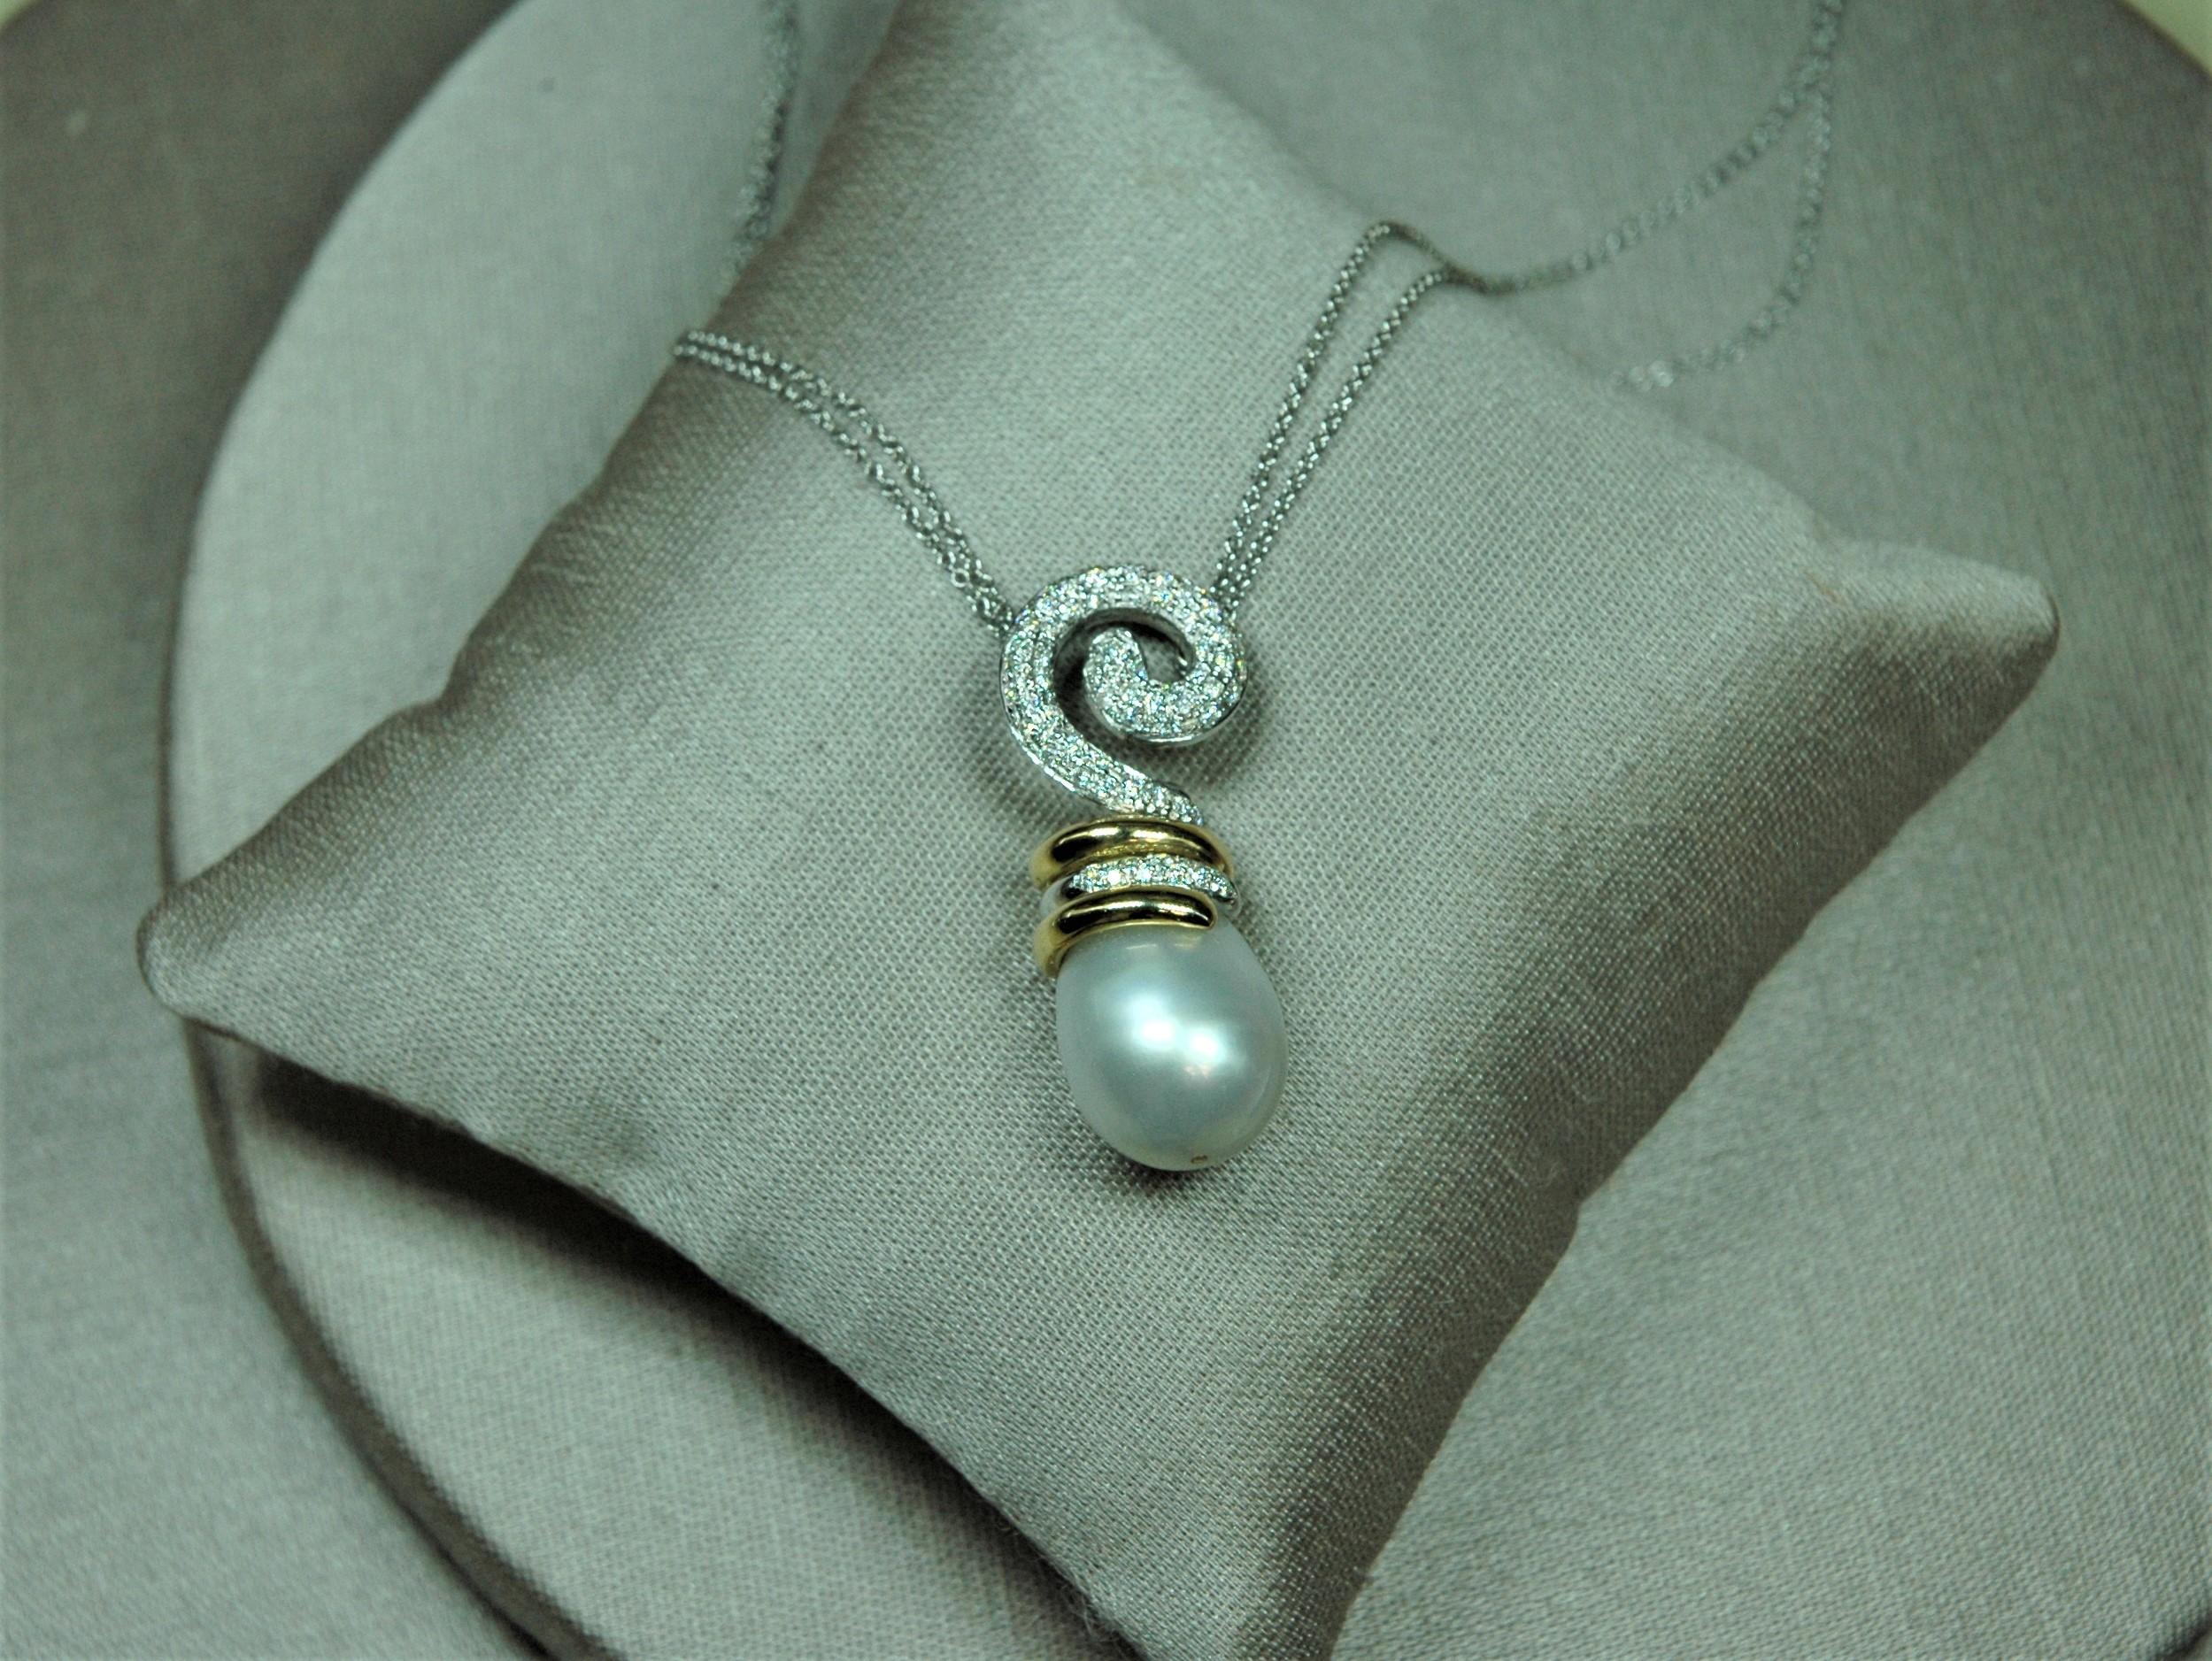 Brilliant Cut 18 Kt, White Gold Pendant Necklace with Diamonds 0.50 Carats and White Pearl For Sale